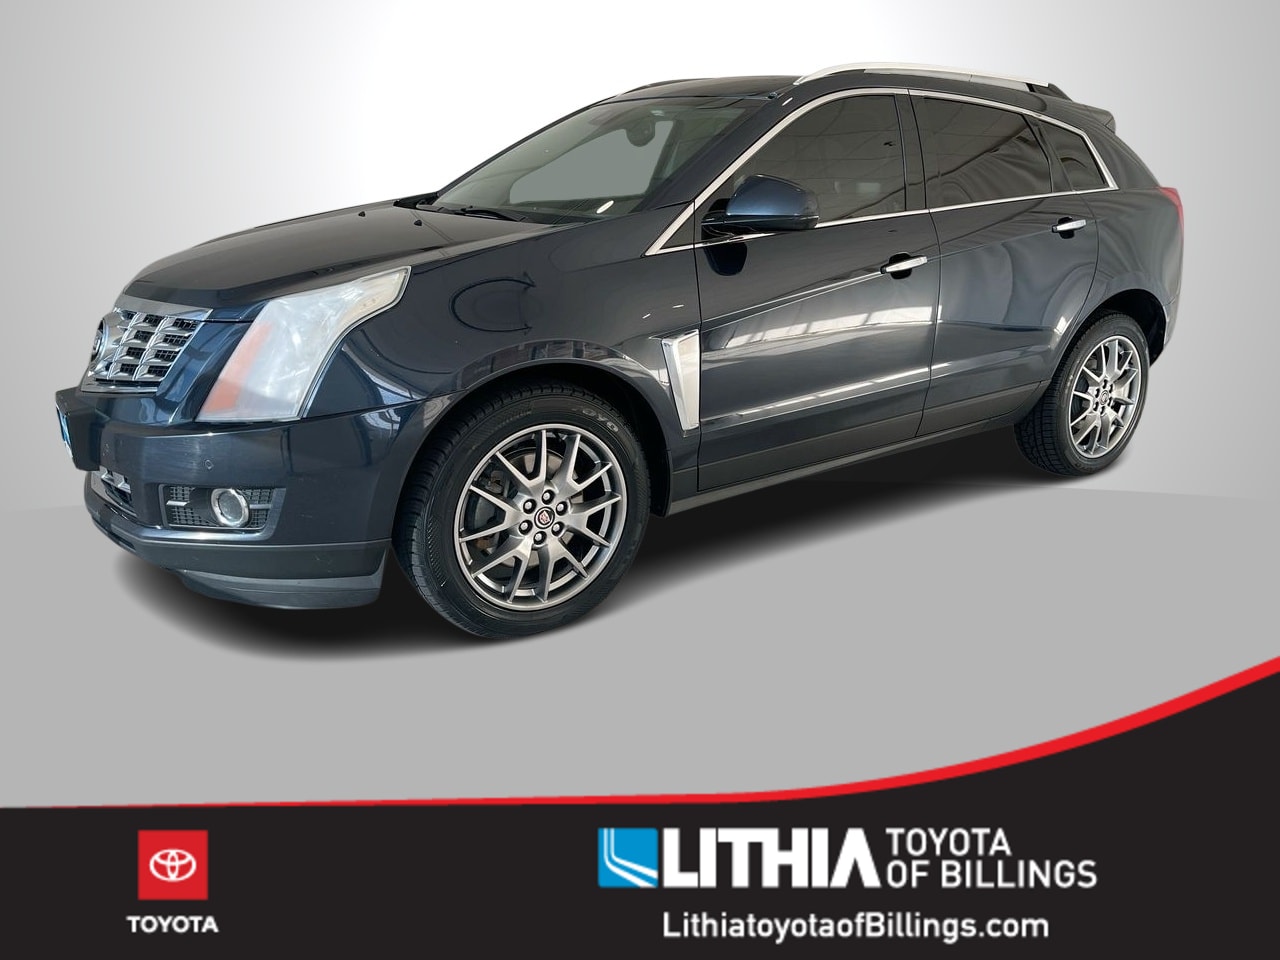 2015 Cadillac SRX Performance Collection